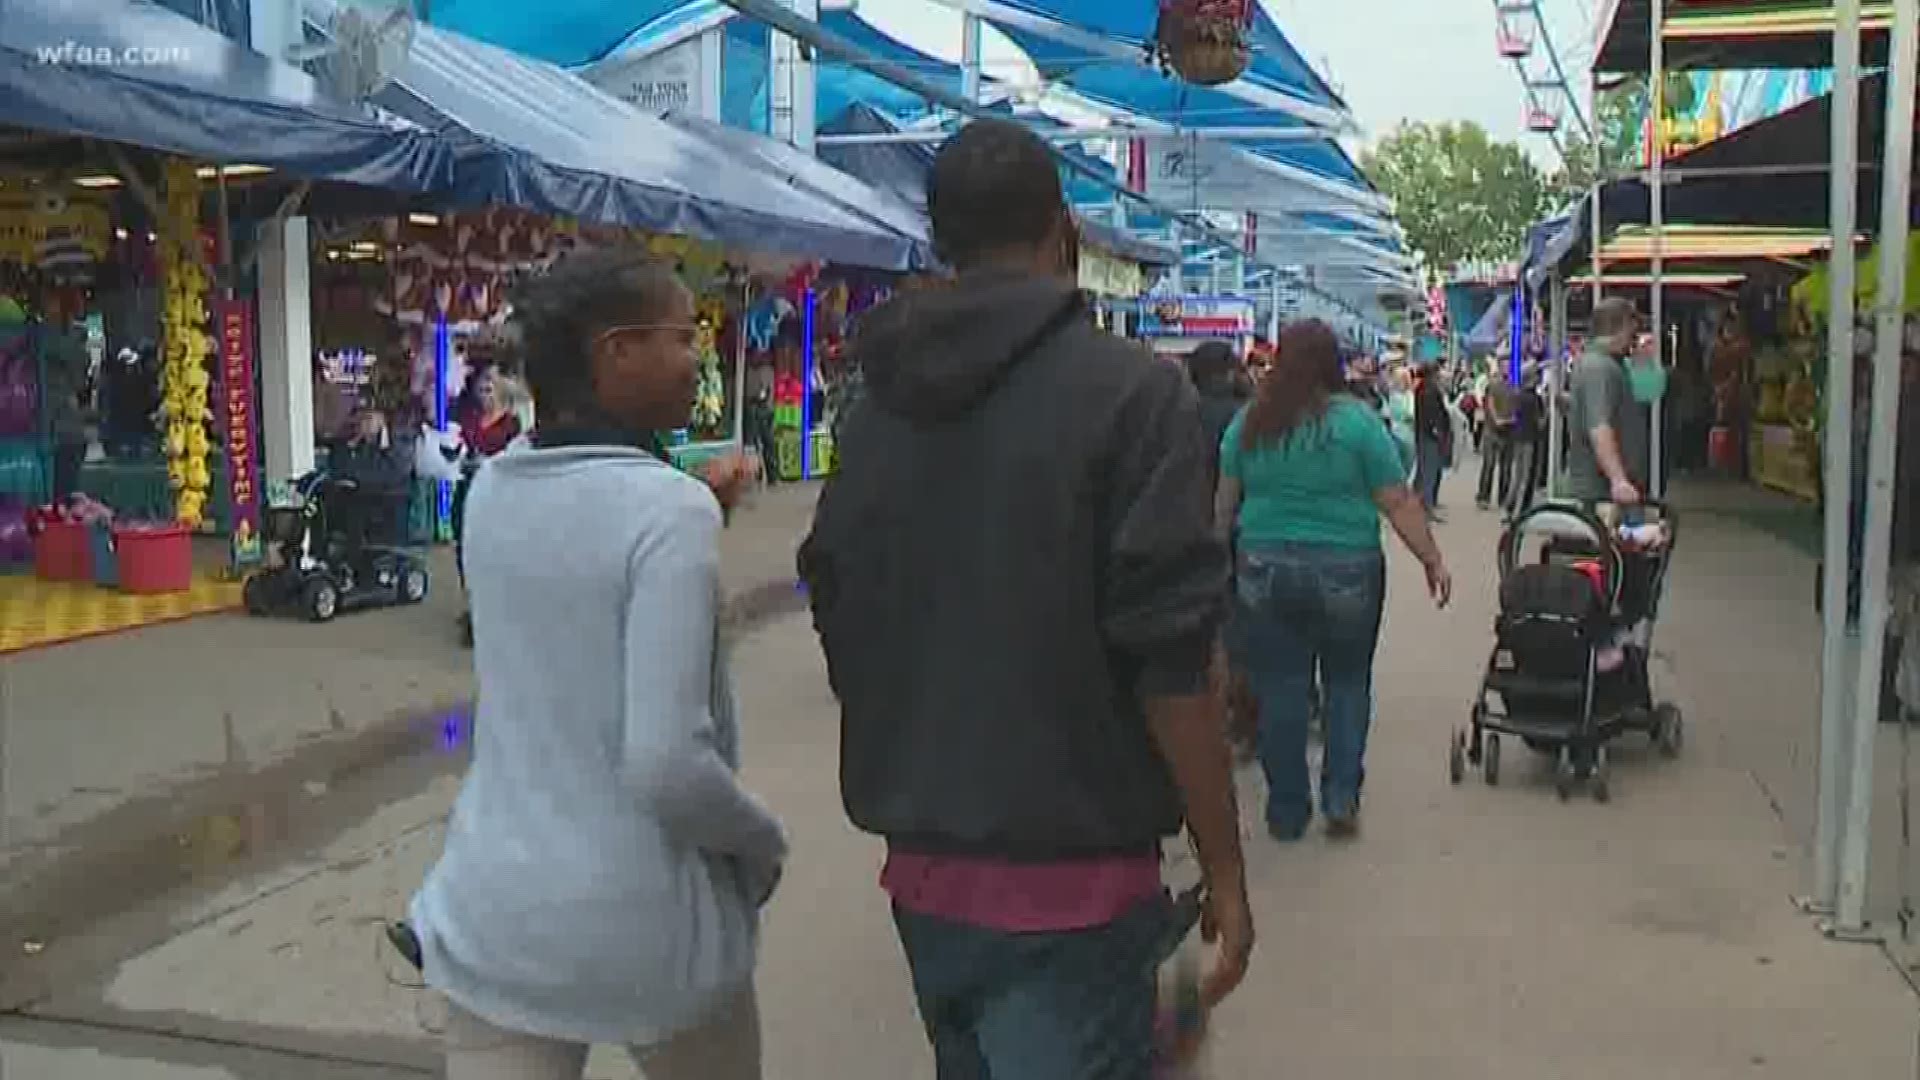 We met brother and sister, both 15-years-old, at the State Fair of Texas during its last week of the 2018 season. They looked happy as they both tried to smash plates, make baskets and win the biggest stuffed animals. But their joy was really coming from